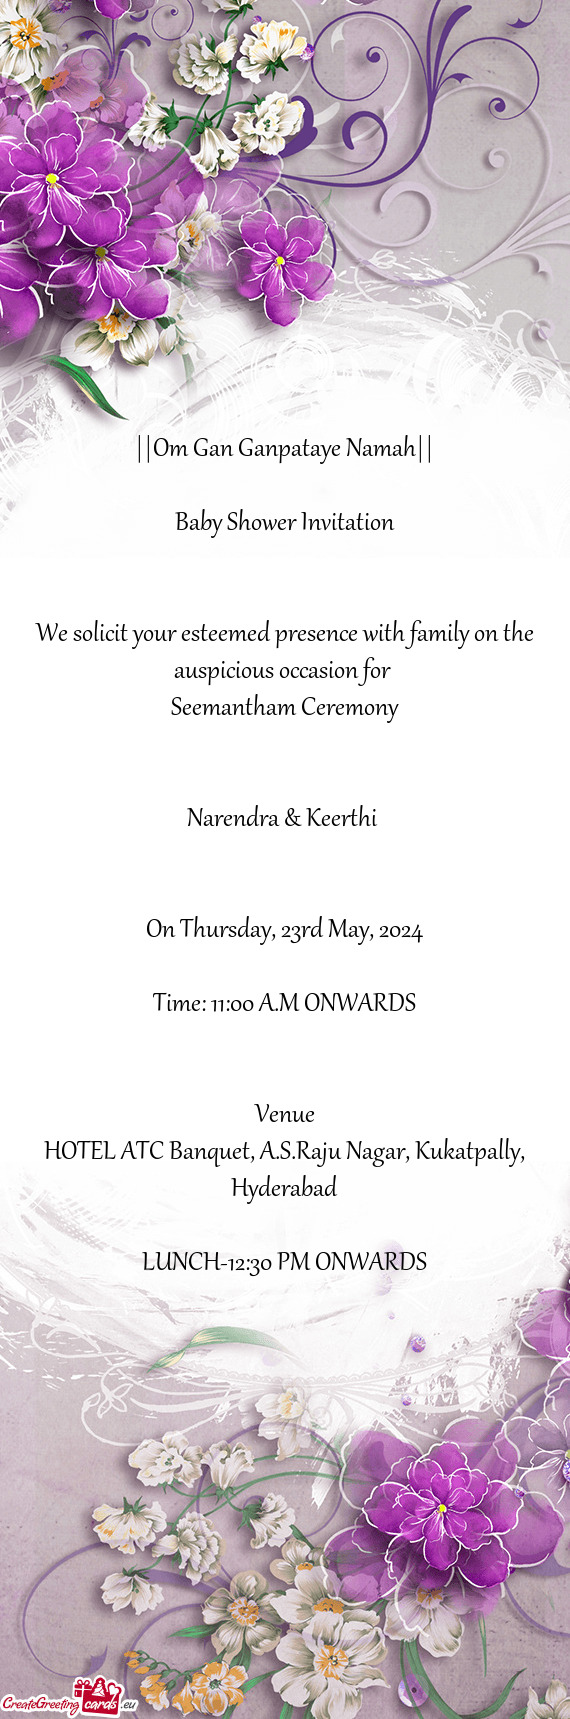 We solicit your esteemed presence with family on the auspicious occasion for